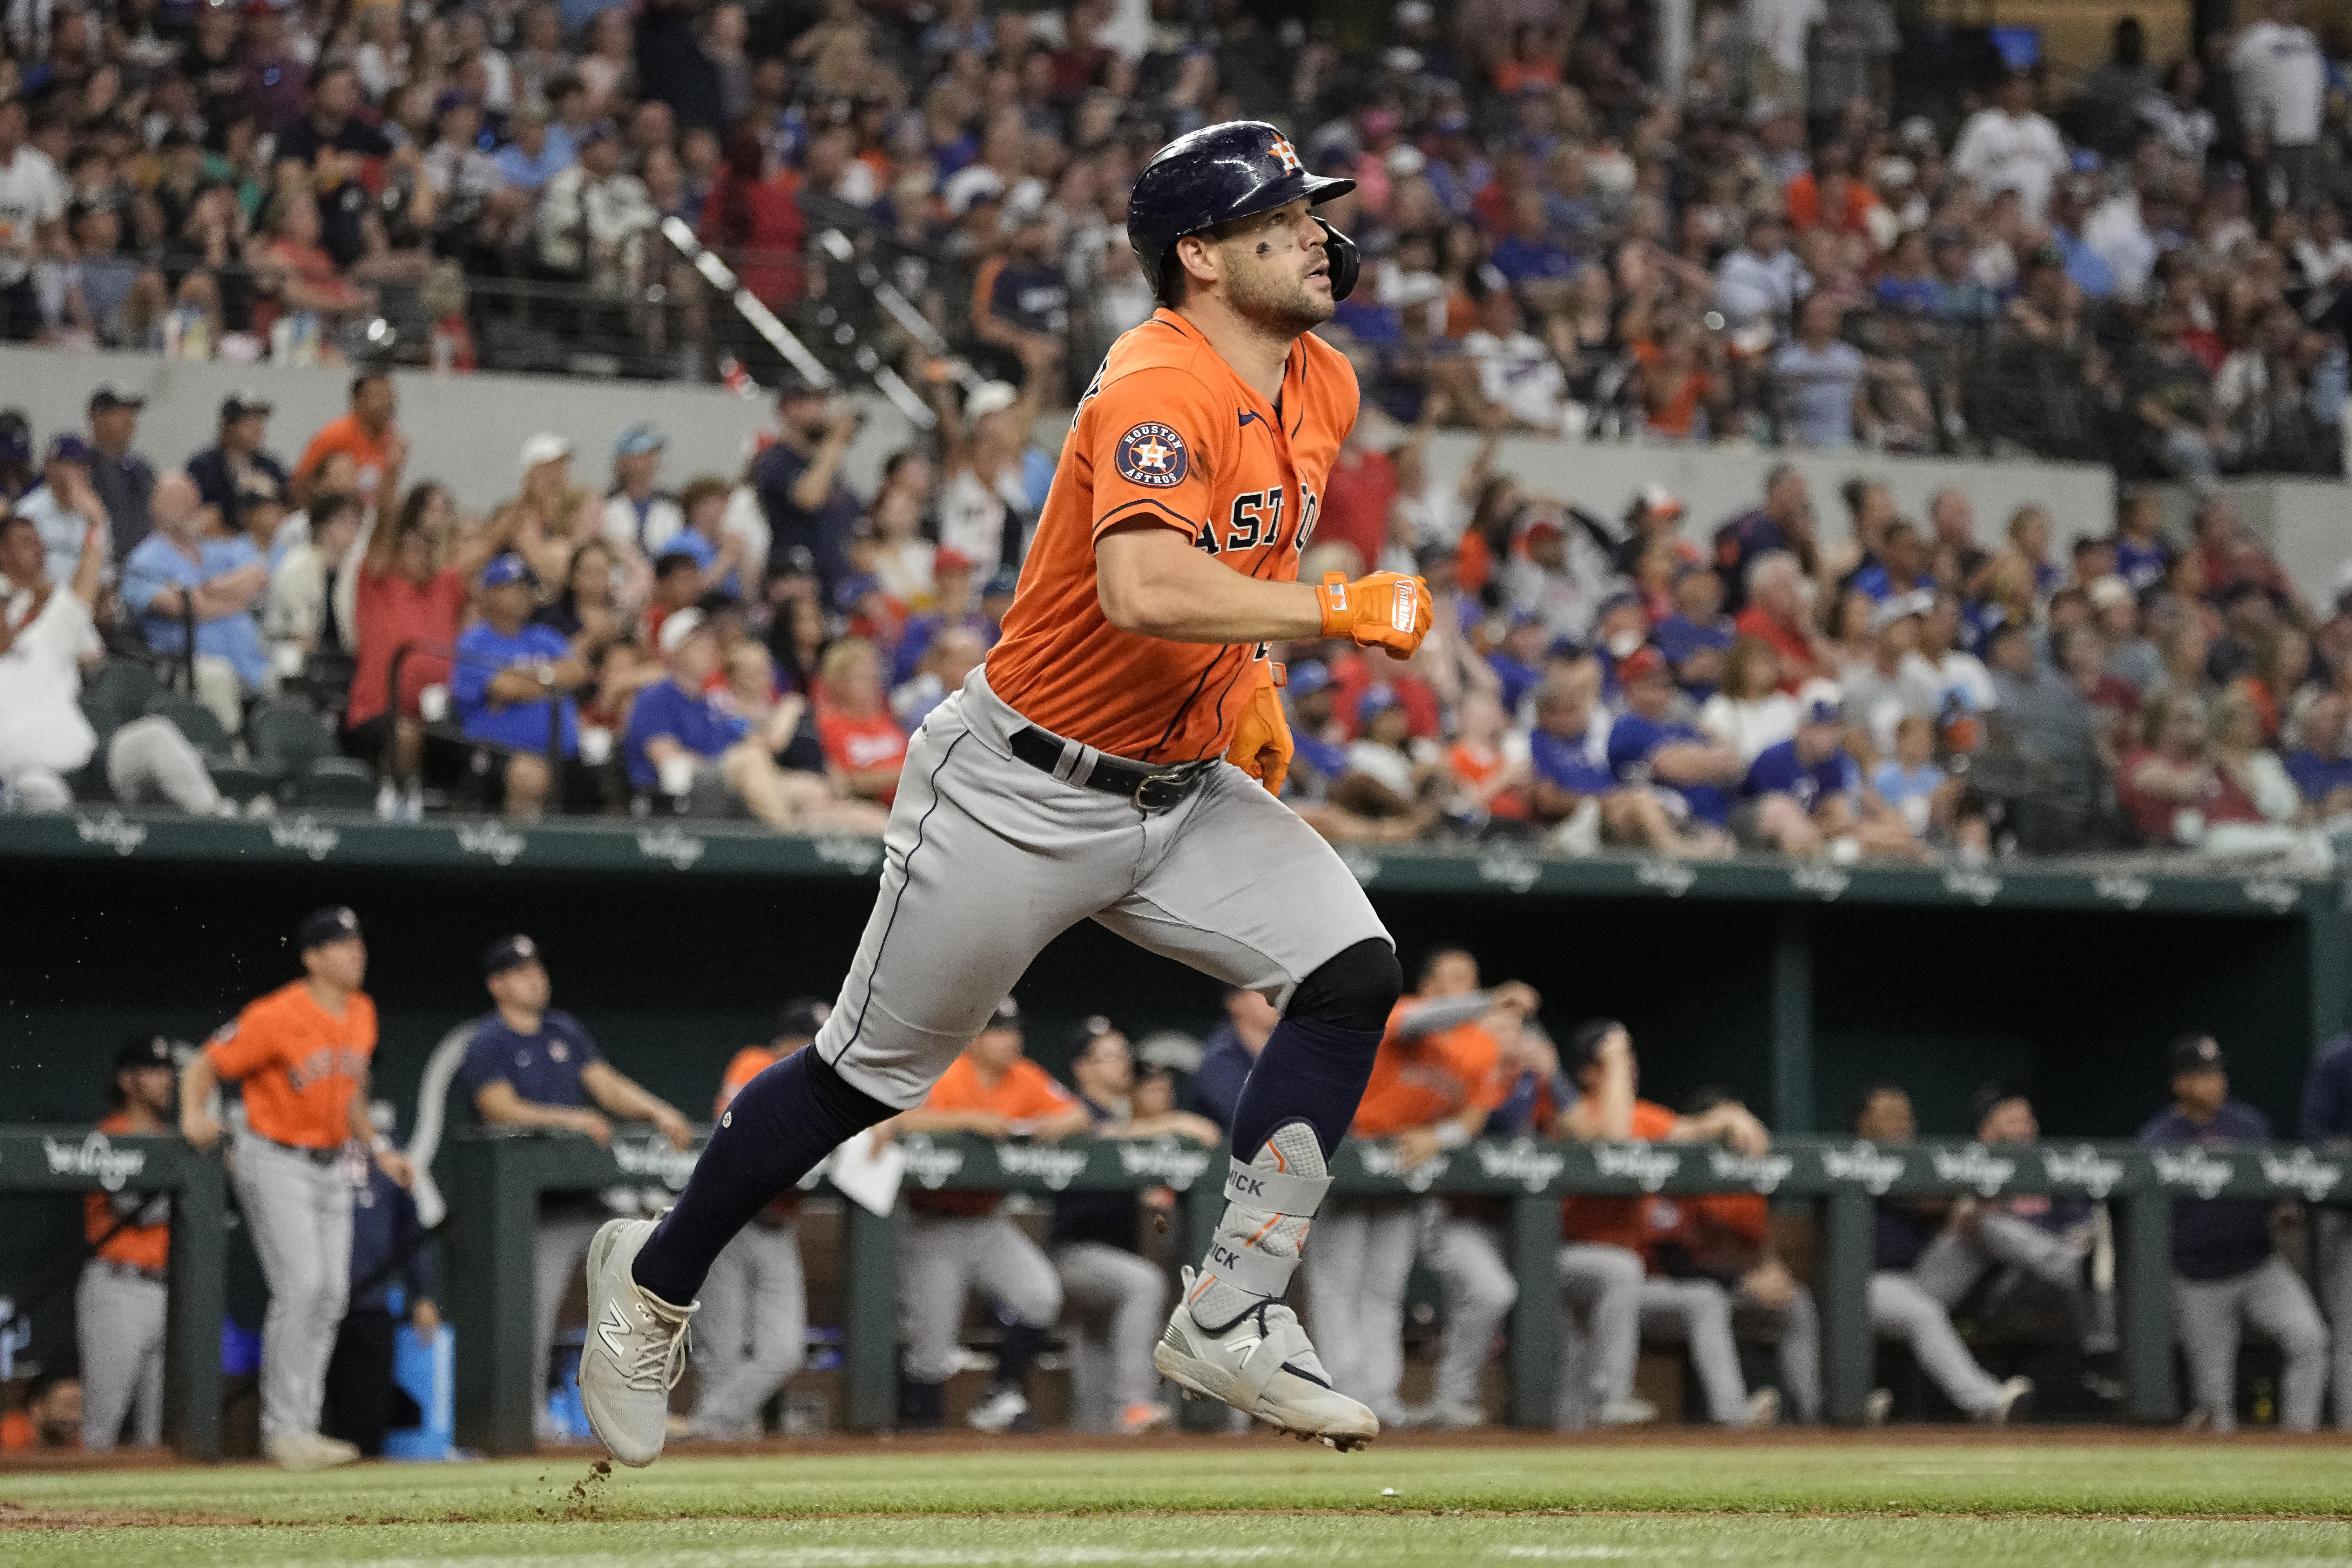 Jose Altuve cleared for baseball activities, return not yet set - NBC Sports